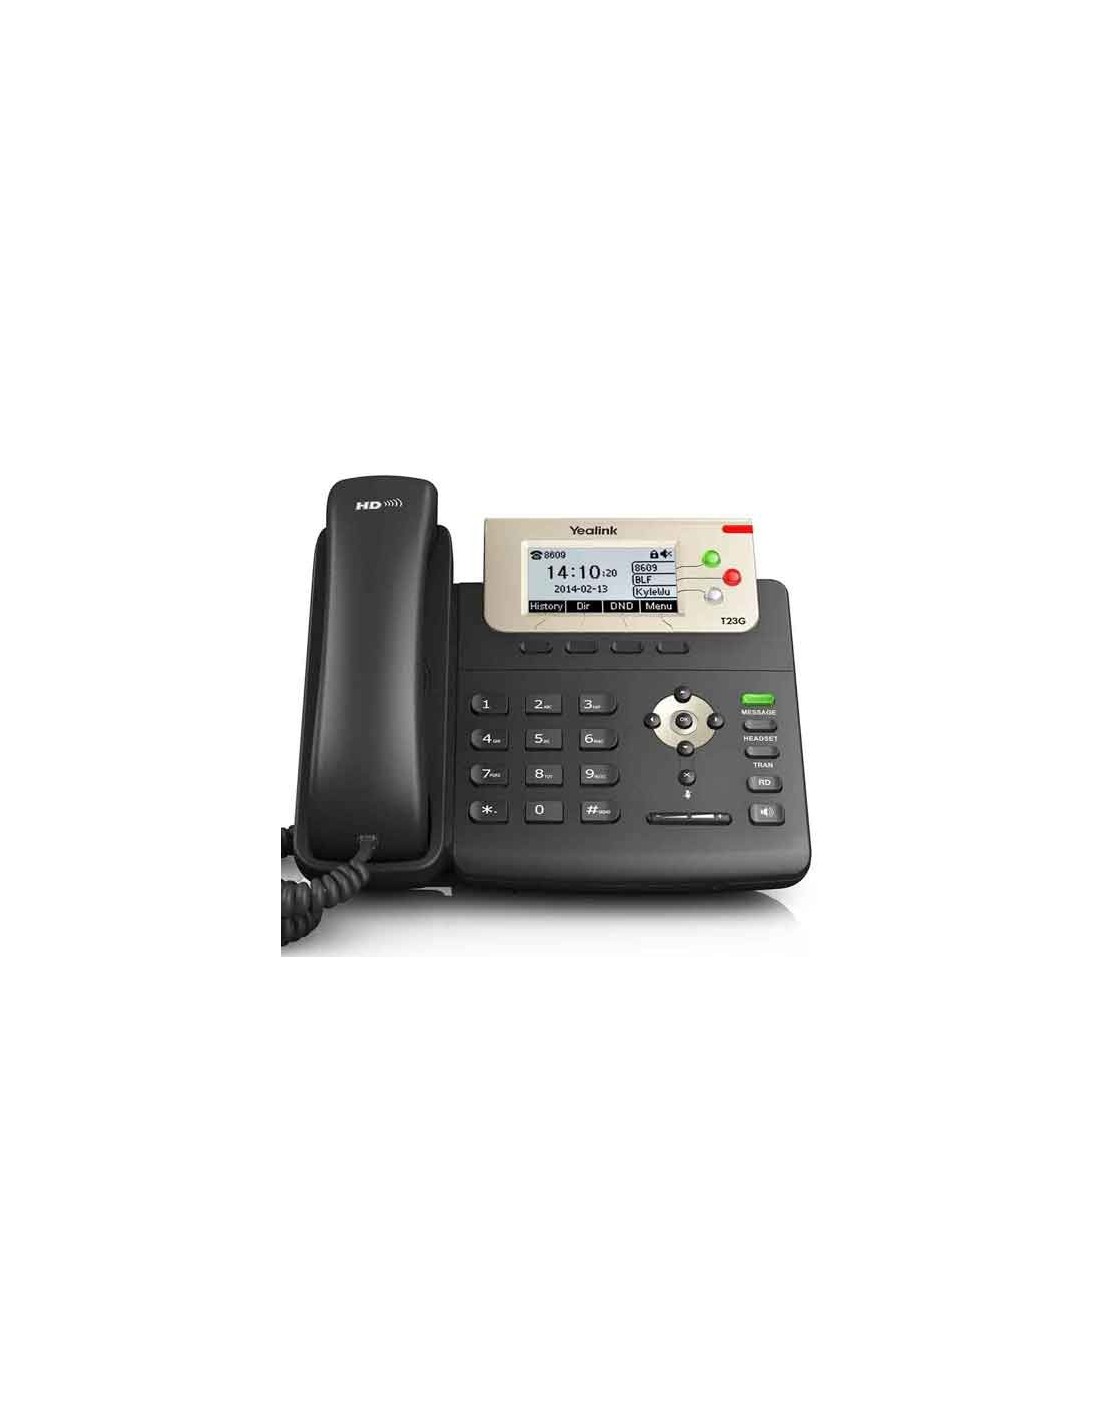 Yealink SIP-T23G IP Phone at a Cheap Price in Dubai Online Store